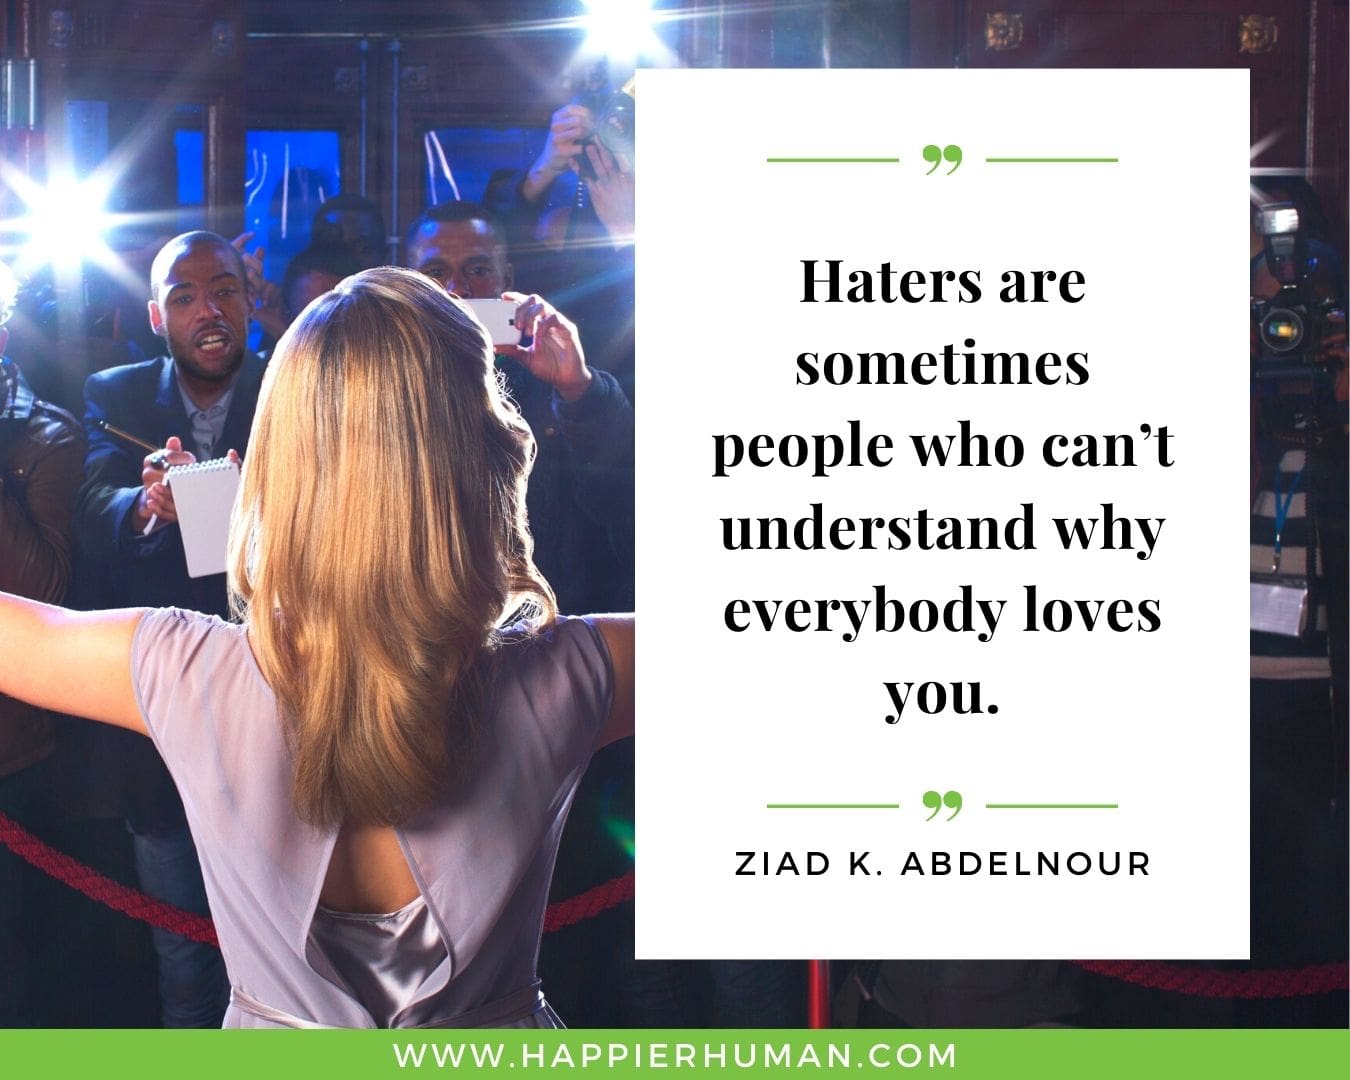 Haters Quotes - “Haters are sometimes people who can’t understand why everybody loves you.“- Ziad K. Abdelnour